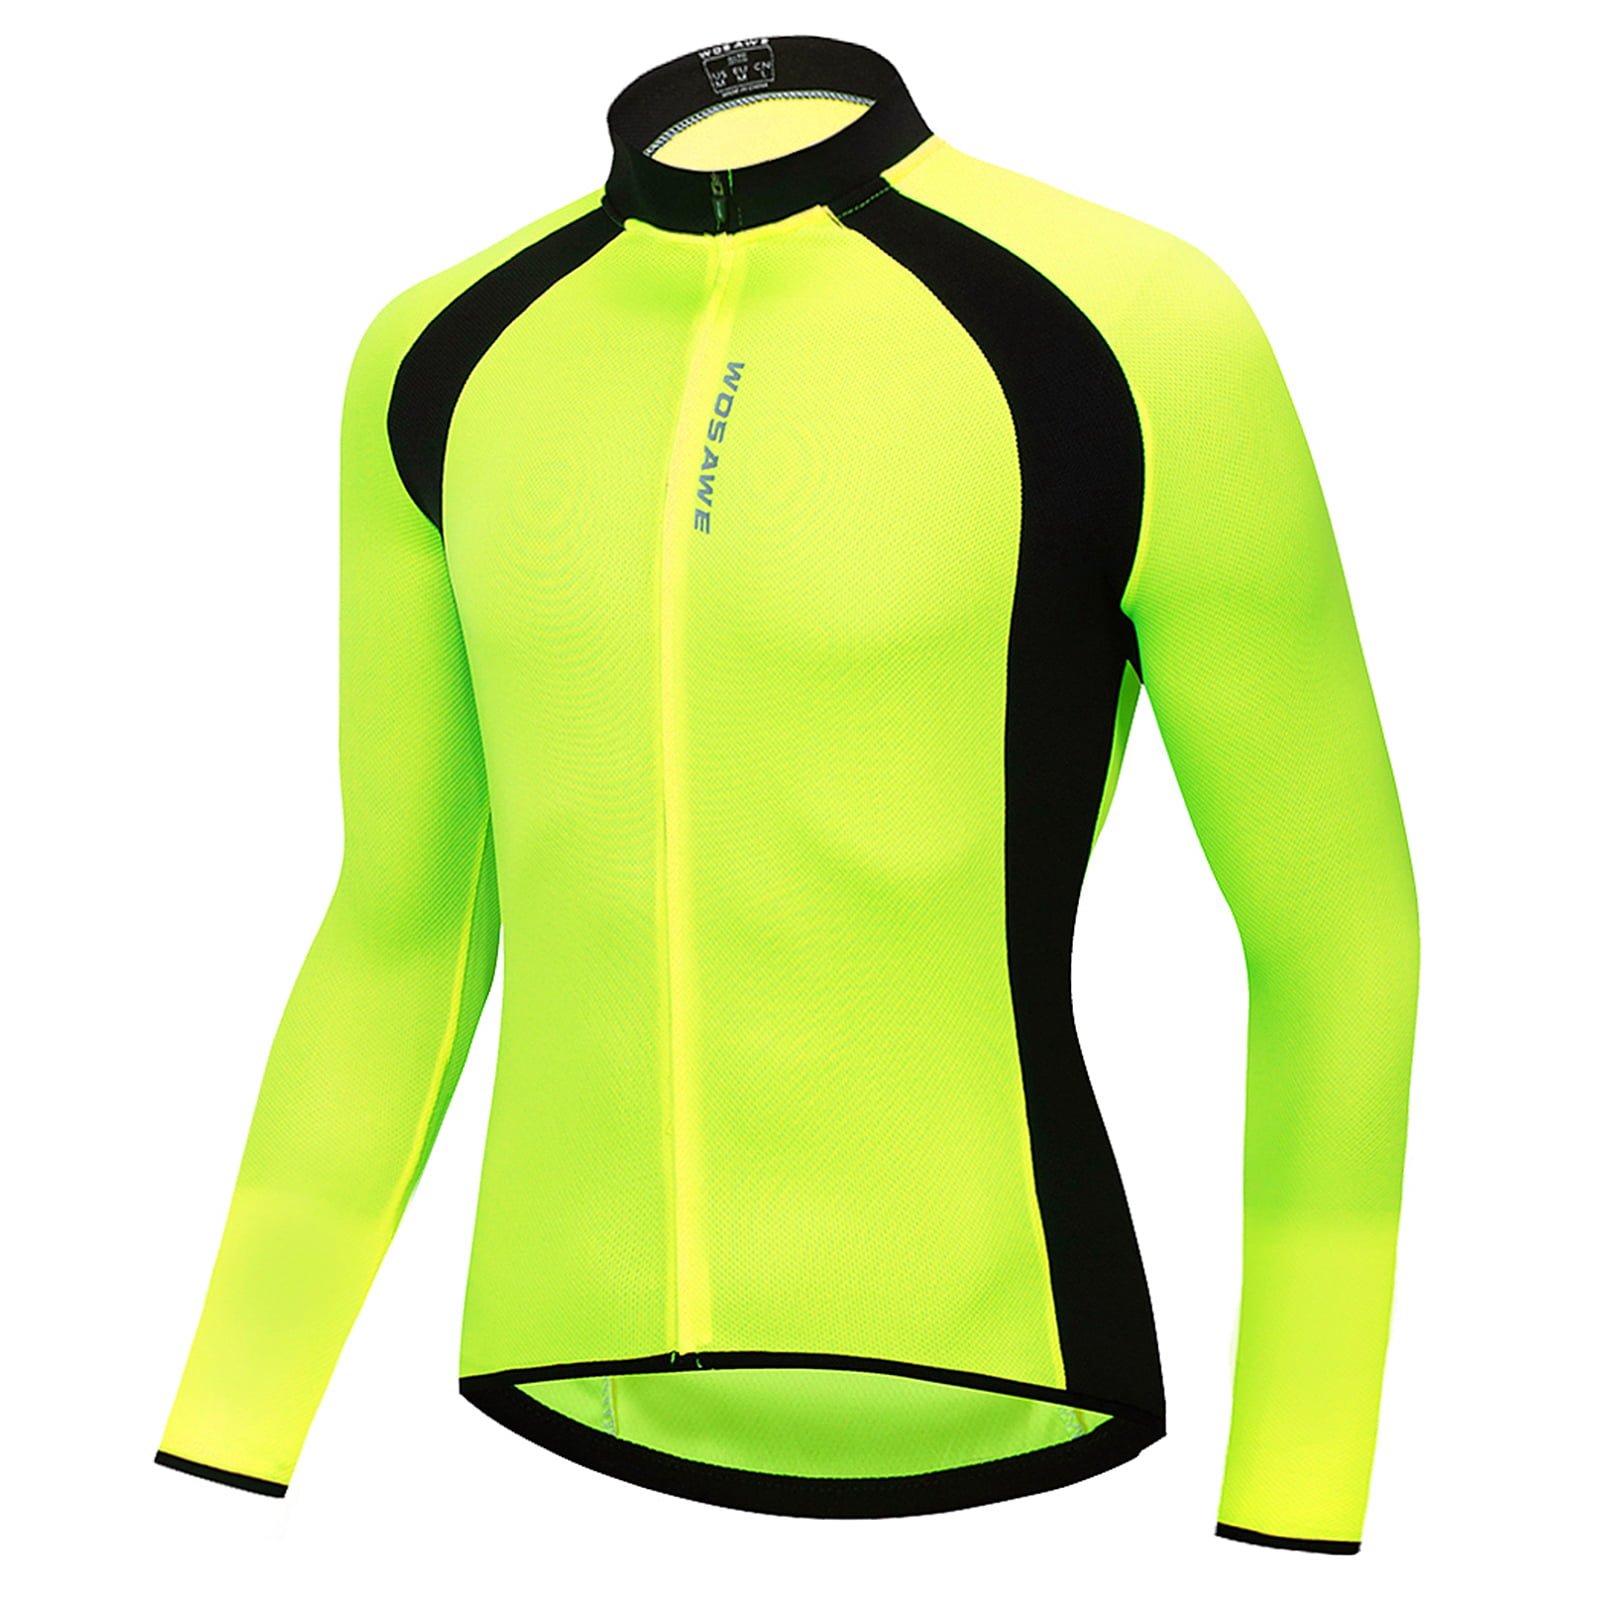 Details about   Cycling Jersey Long Sleeve Full Zip Women's Bicycle Shirt Jacket Reflective L